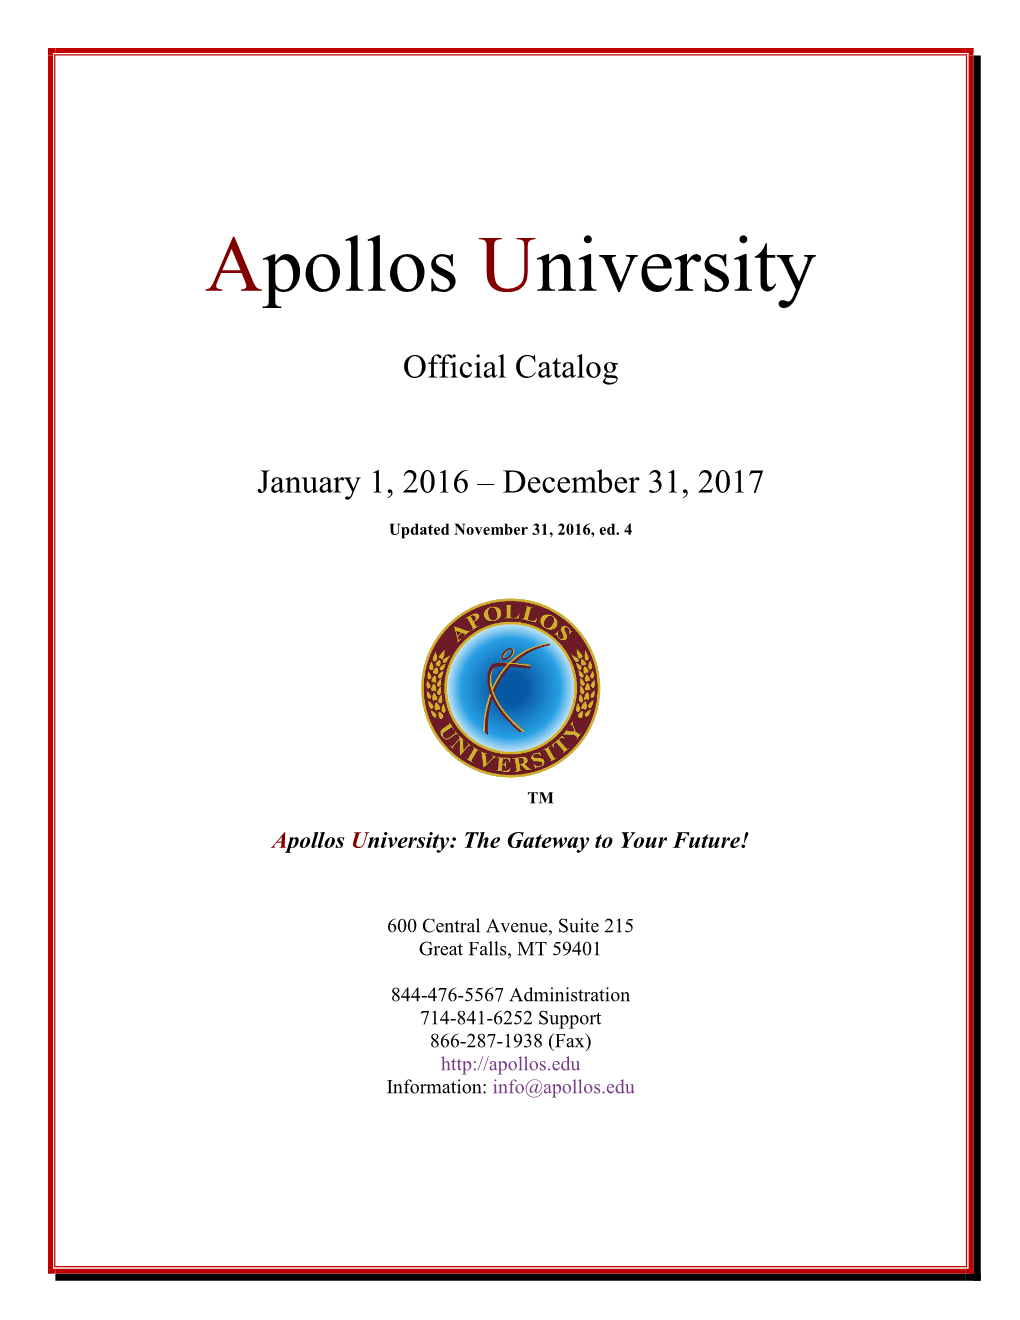 Apollos University Catalog Each Veteran Or Eligible Person Will Be Required to Provide Apollos with a Signed Copy of the Following Verification Document